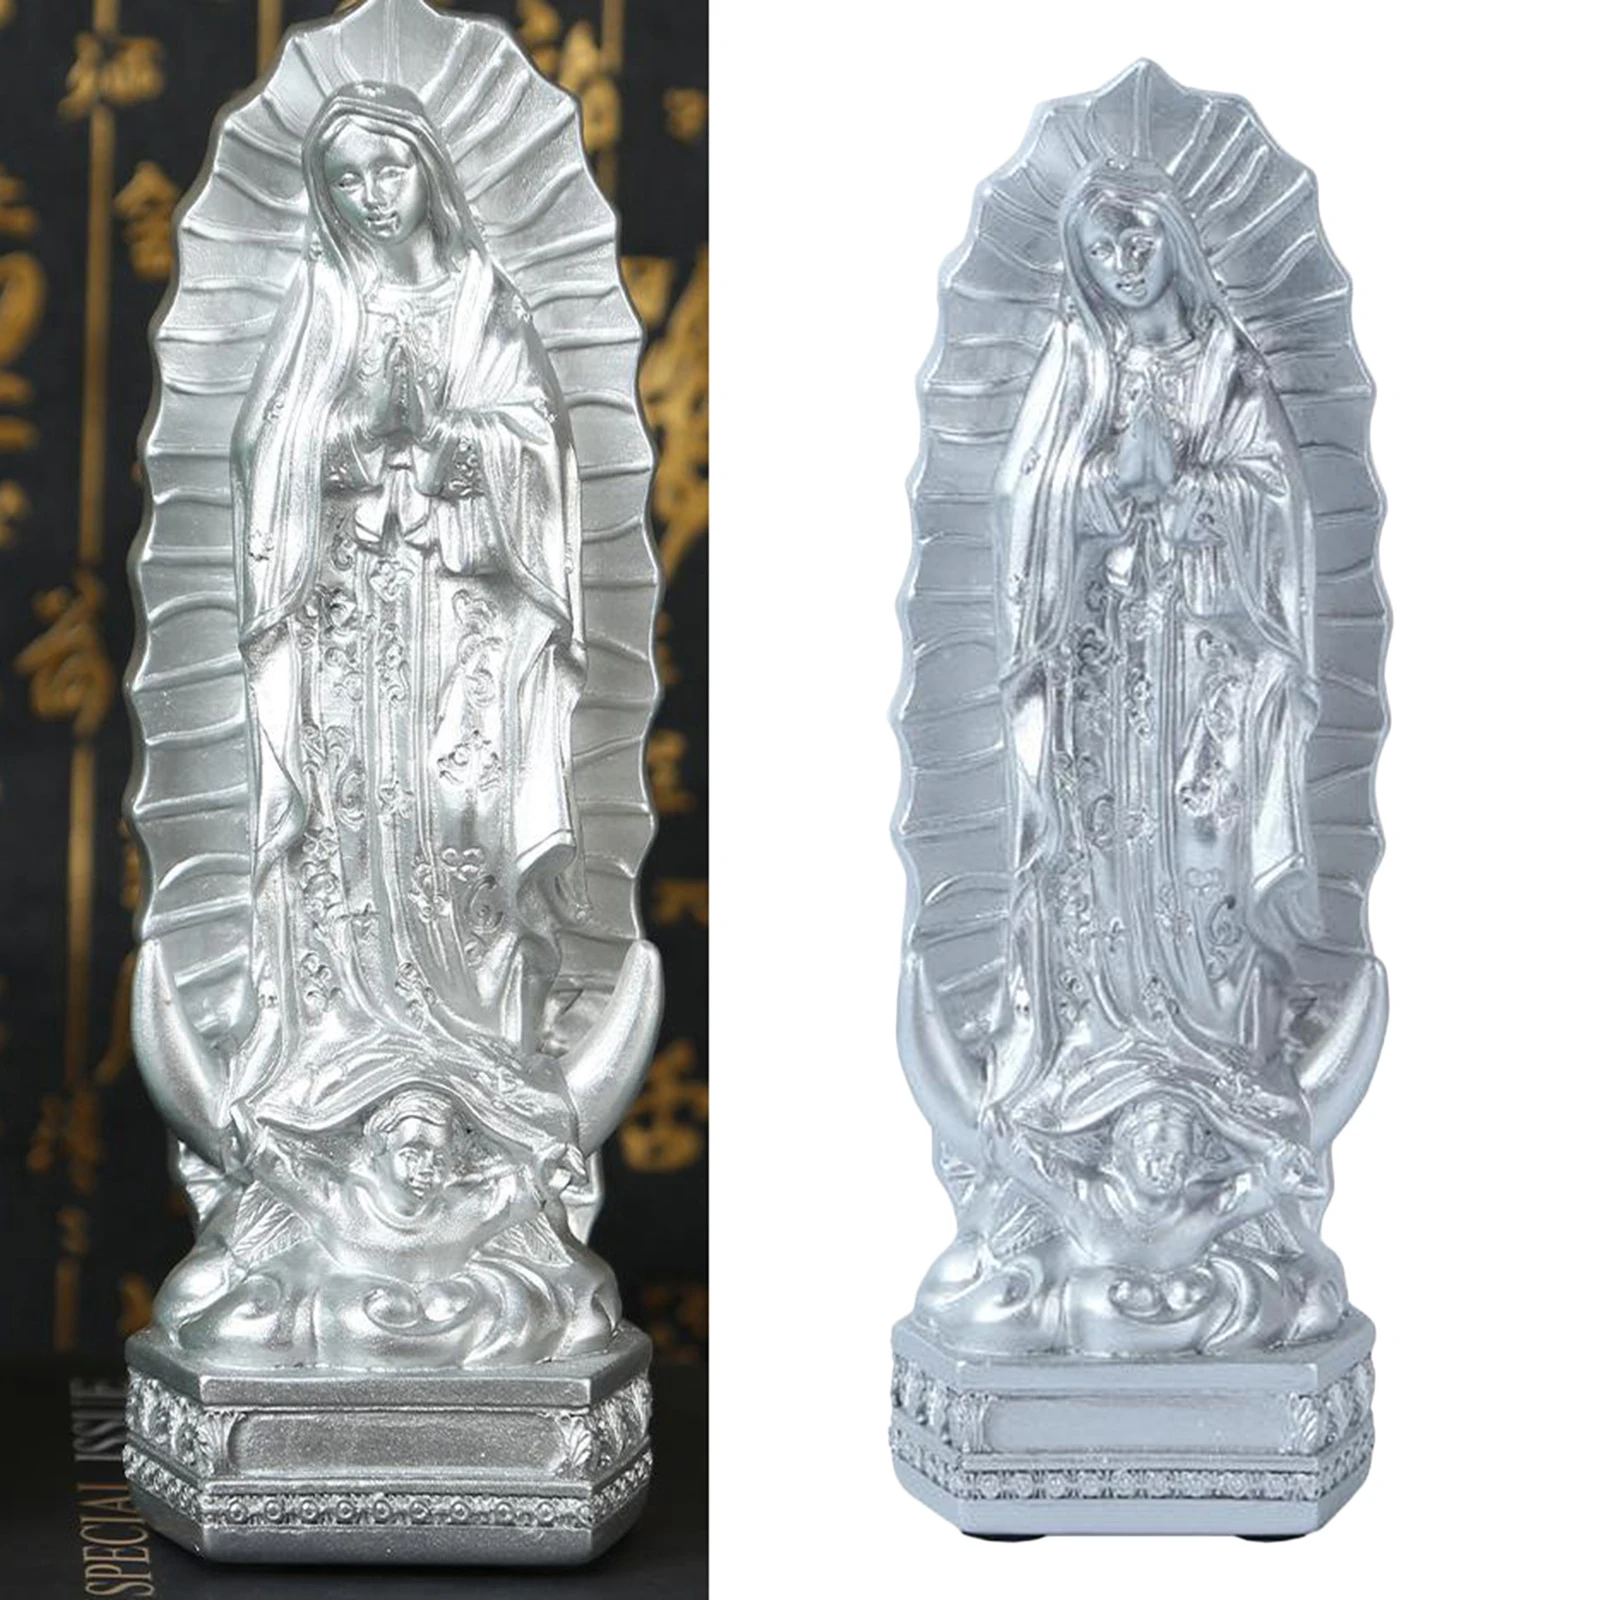 Mother of God Virgin Mary Virgin Mary Statue Sculpture Virgin Mary Figurine Our Lady of Lourdes Decorative Statue Ornament